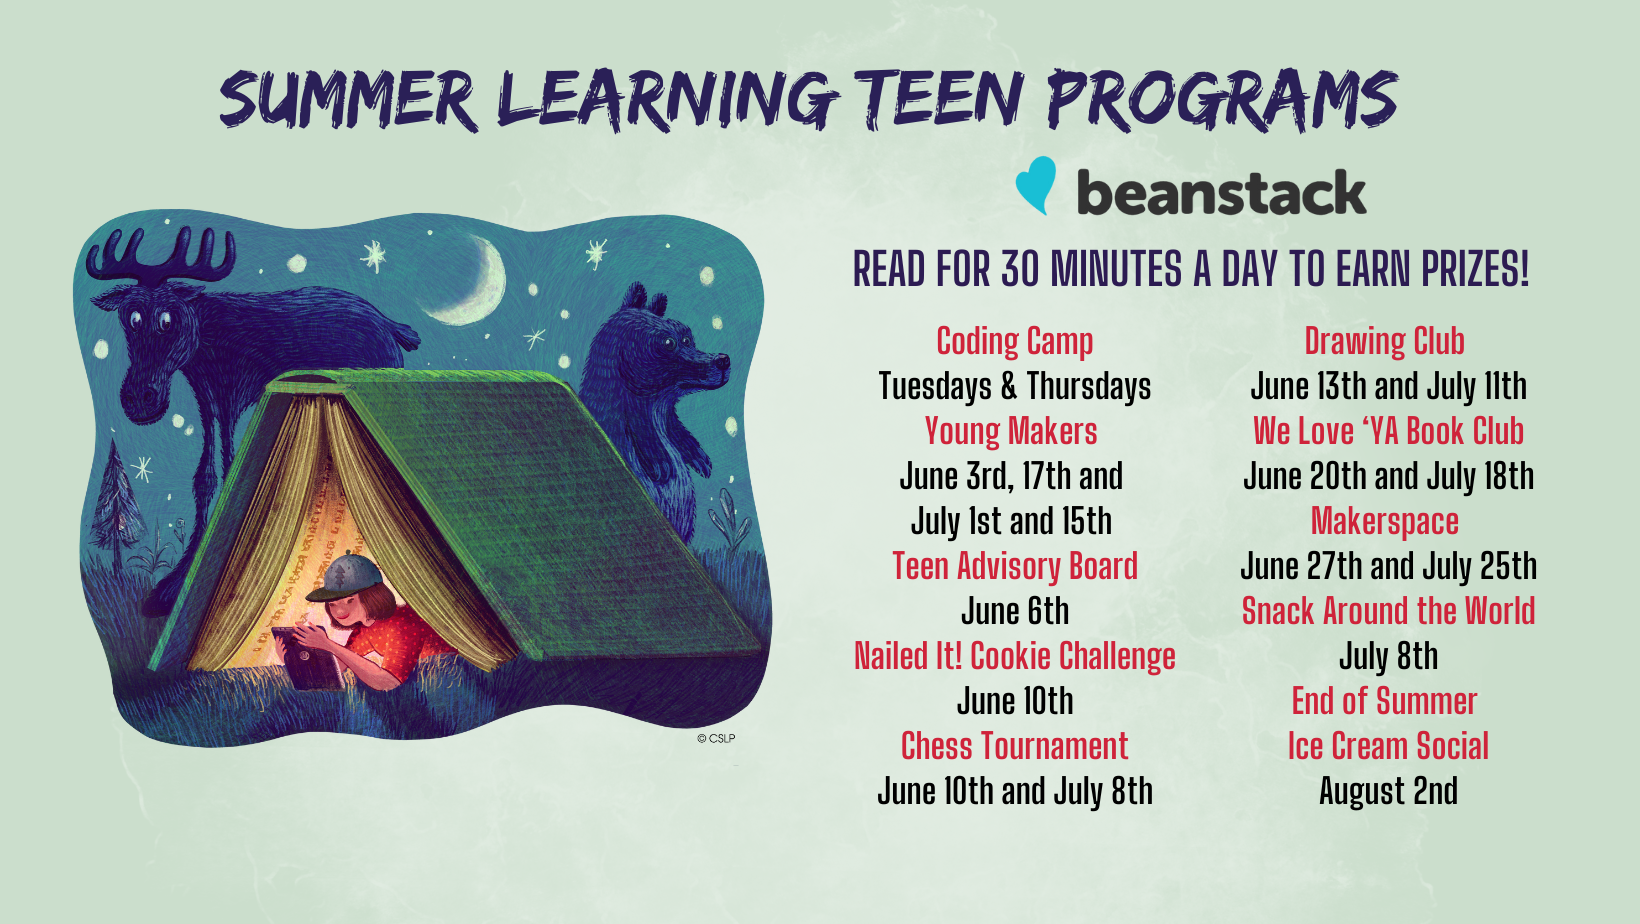 Summer Learning Teen Programs. Beanstack -- Read for 30 Minutes a Day to Earn Prizes! Coding Camp -- Tuesdays & Thursdays. Young Makers -- June 3rd, June 17th, July 1st, and July 15th. Teen Advisory Board -- June 6th; Nailed It! Cookie Challenge -- June 10. Chess Tournament -- June 10th & July 8th. Drawing Club -- June 13th and July 11th. We Love 'YA Book Club -- June 20th and July 18th. Makerspace -- June 27th and July 25th. Snack Around The World -- July 8th. End of Summer Ice Cream Social -- August 2nd.